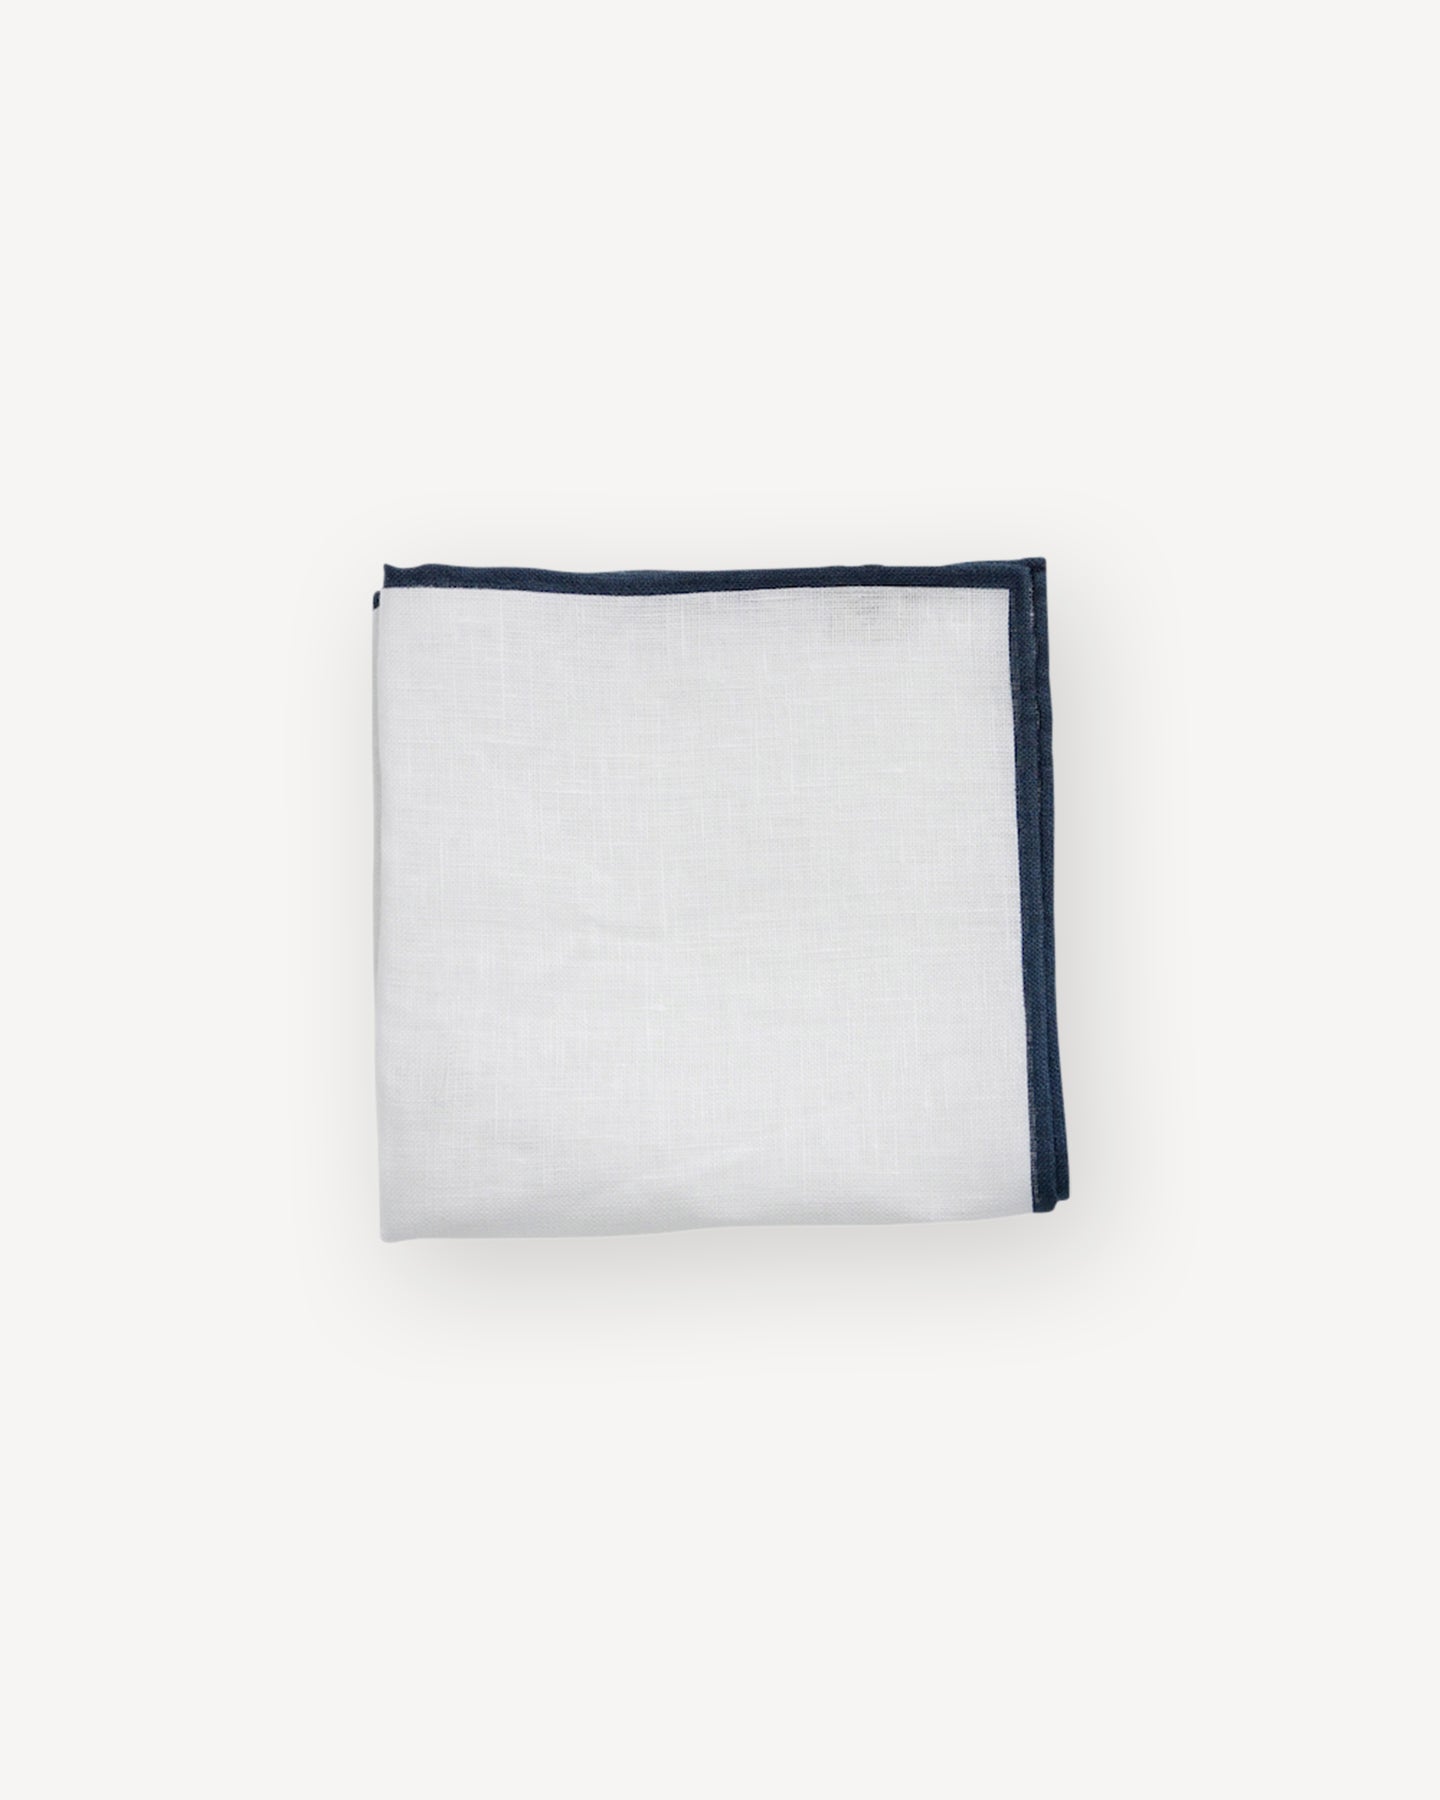 White linen pocket square with navy shoestring